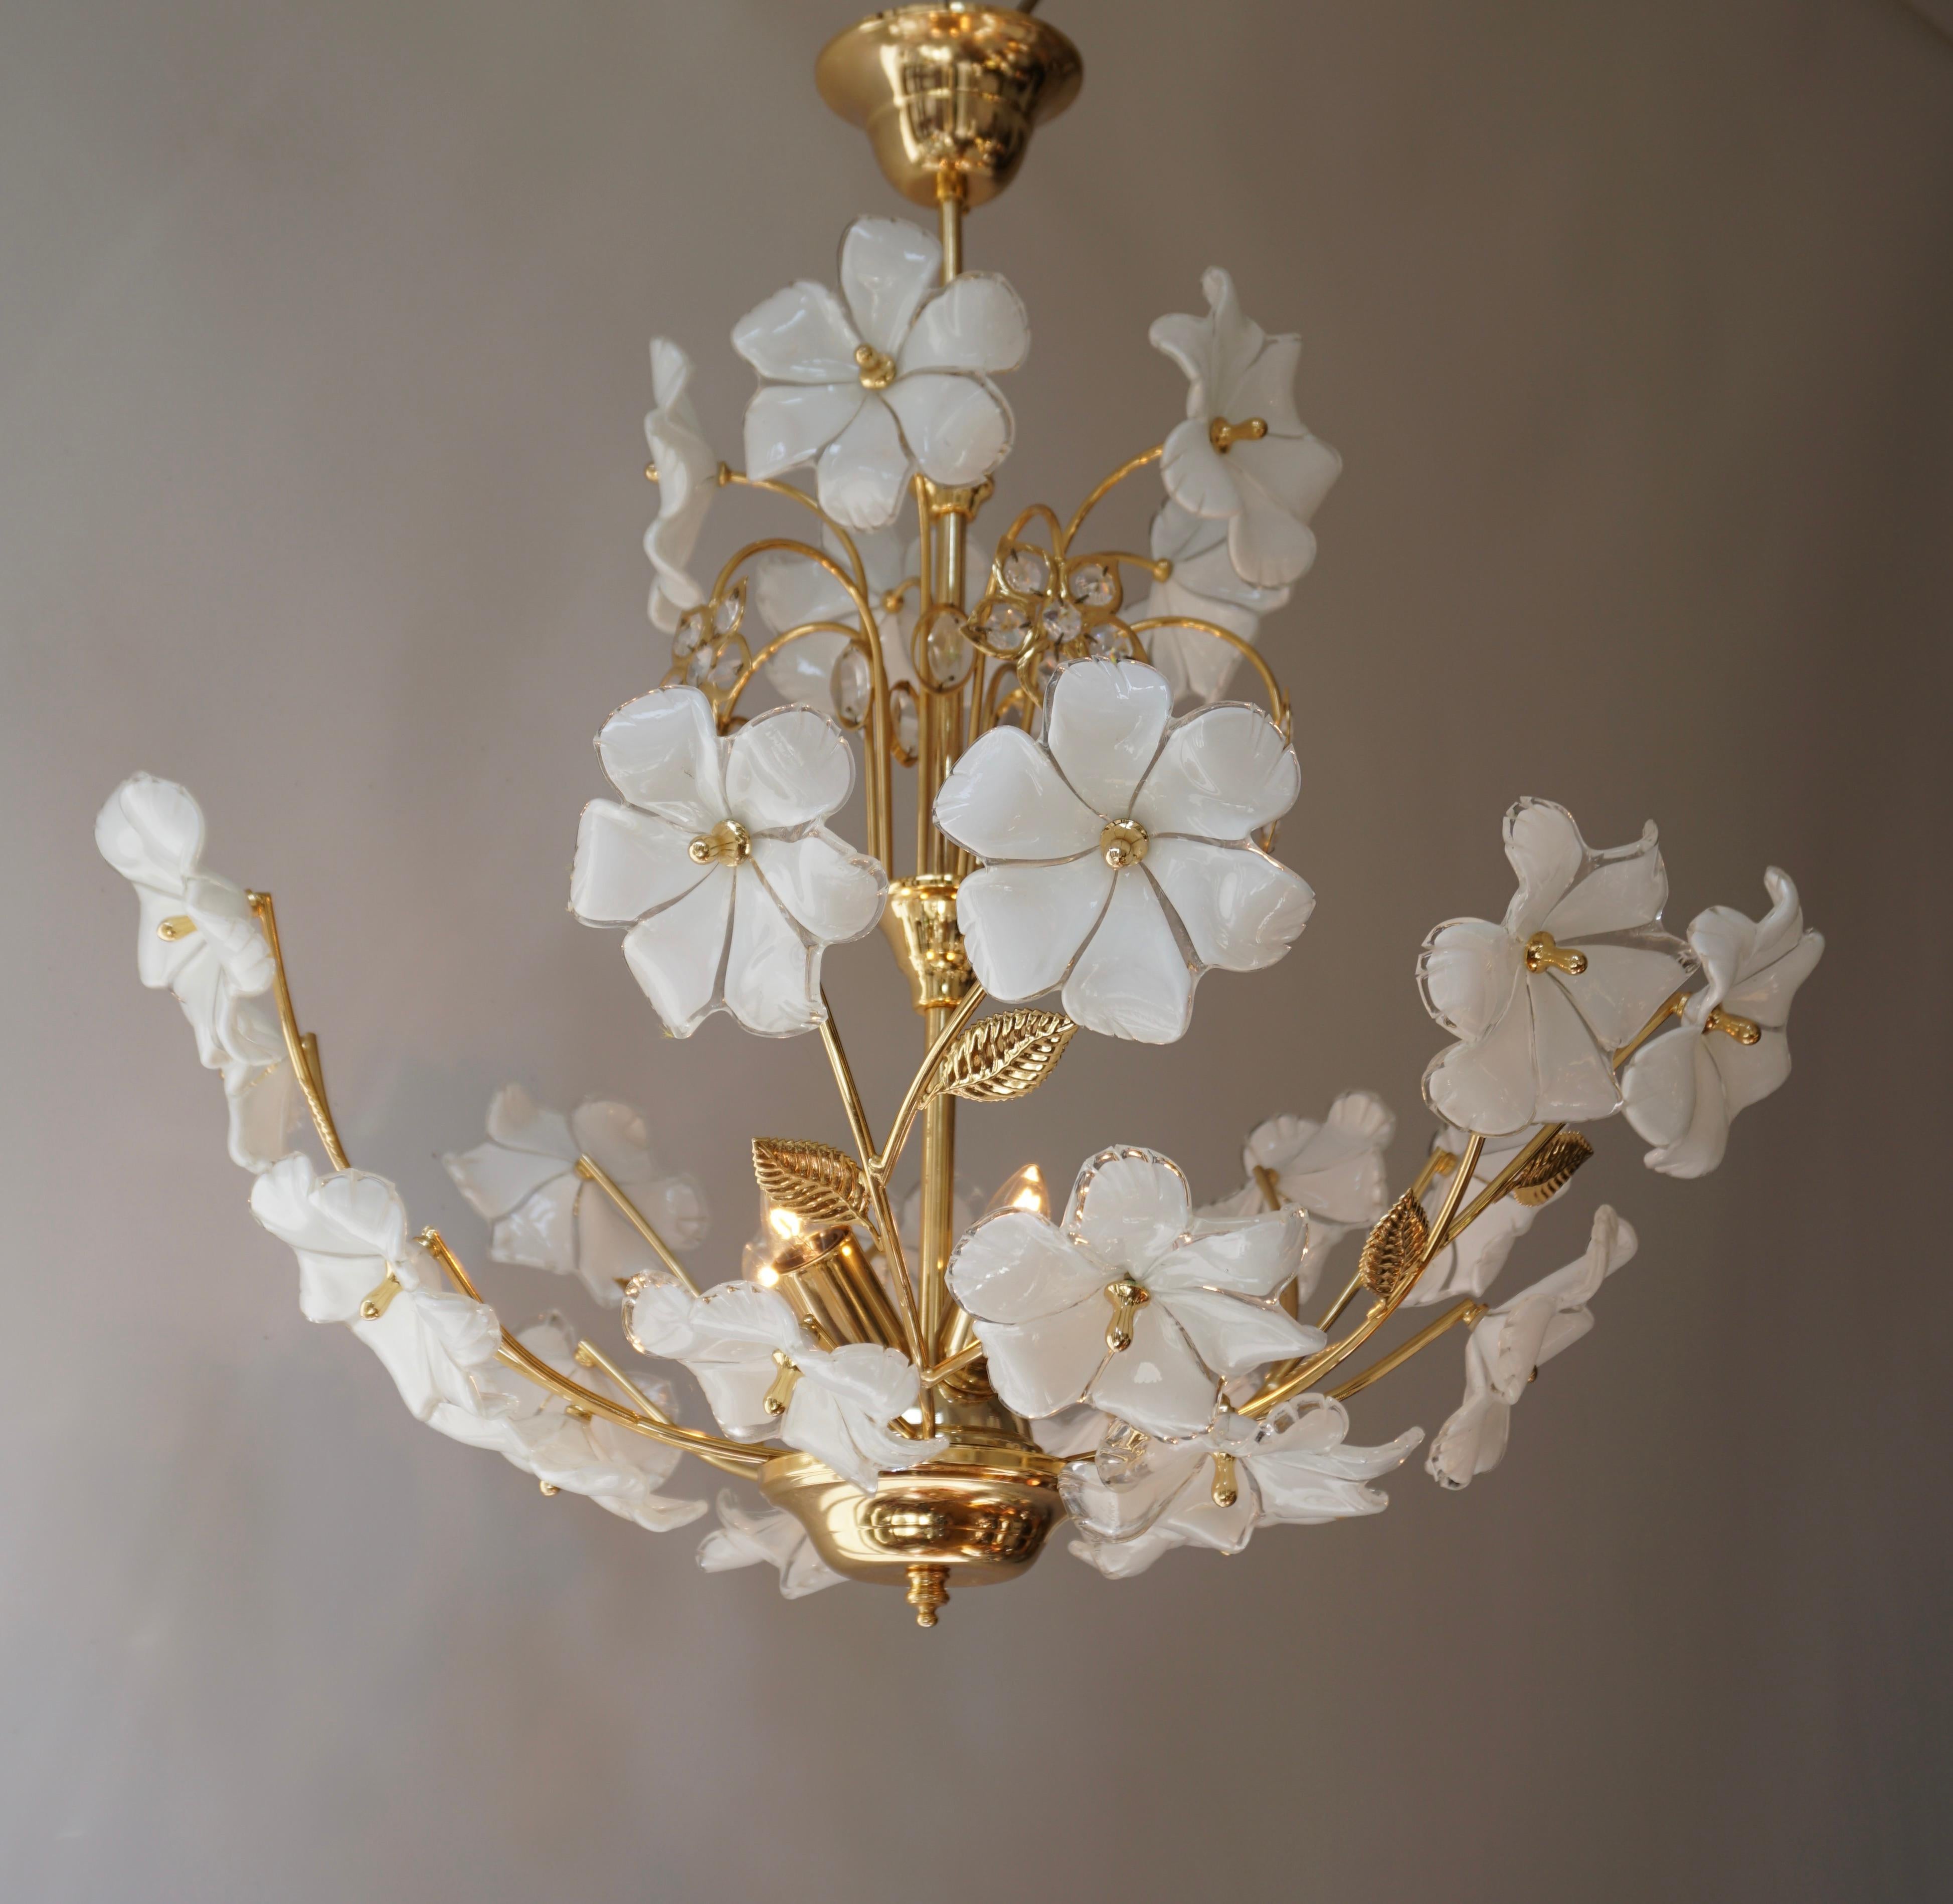 Large Italian brass chandelier with white Murano glass and crystal flowers.

The light requires five single E14 screw fit lightbulbs (40Watt max.) LED compatible.

Measures: Diameter 63 cm.
Height fixture 50 cm.
Total height including chain 65